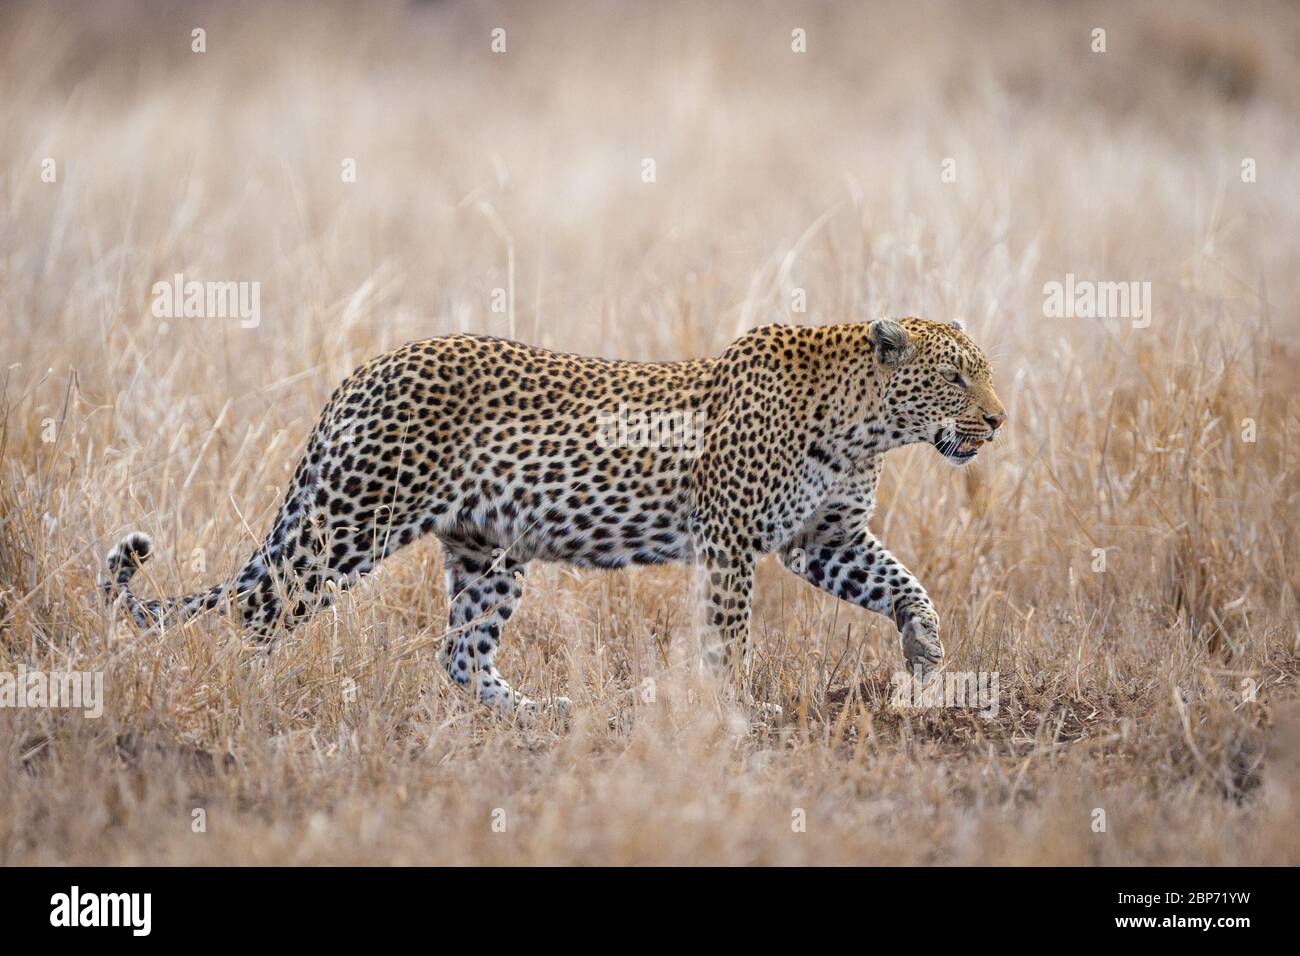 One single adult female African Leopard walking through grass Kruger park South Africa Stock Photo